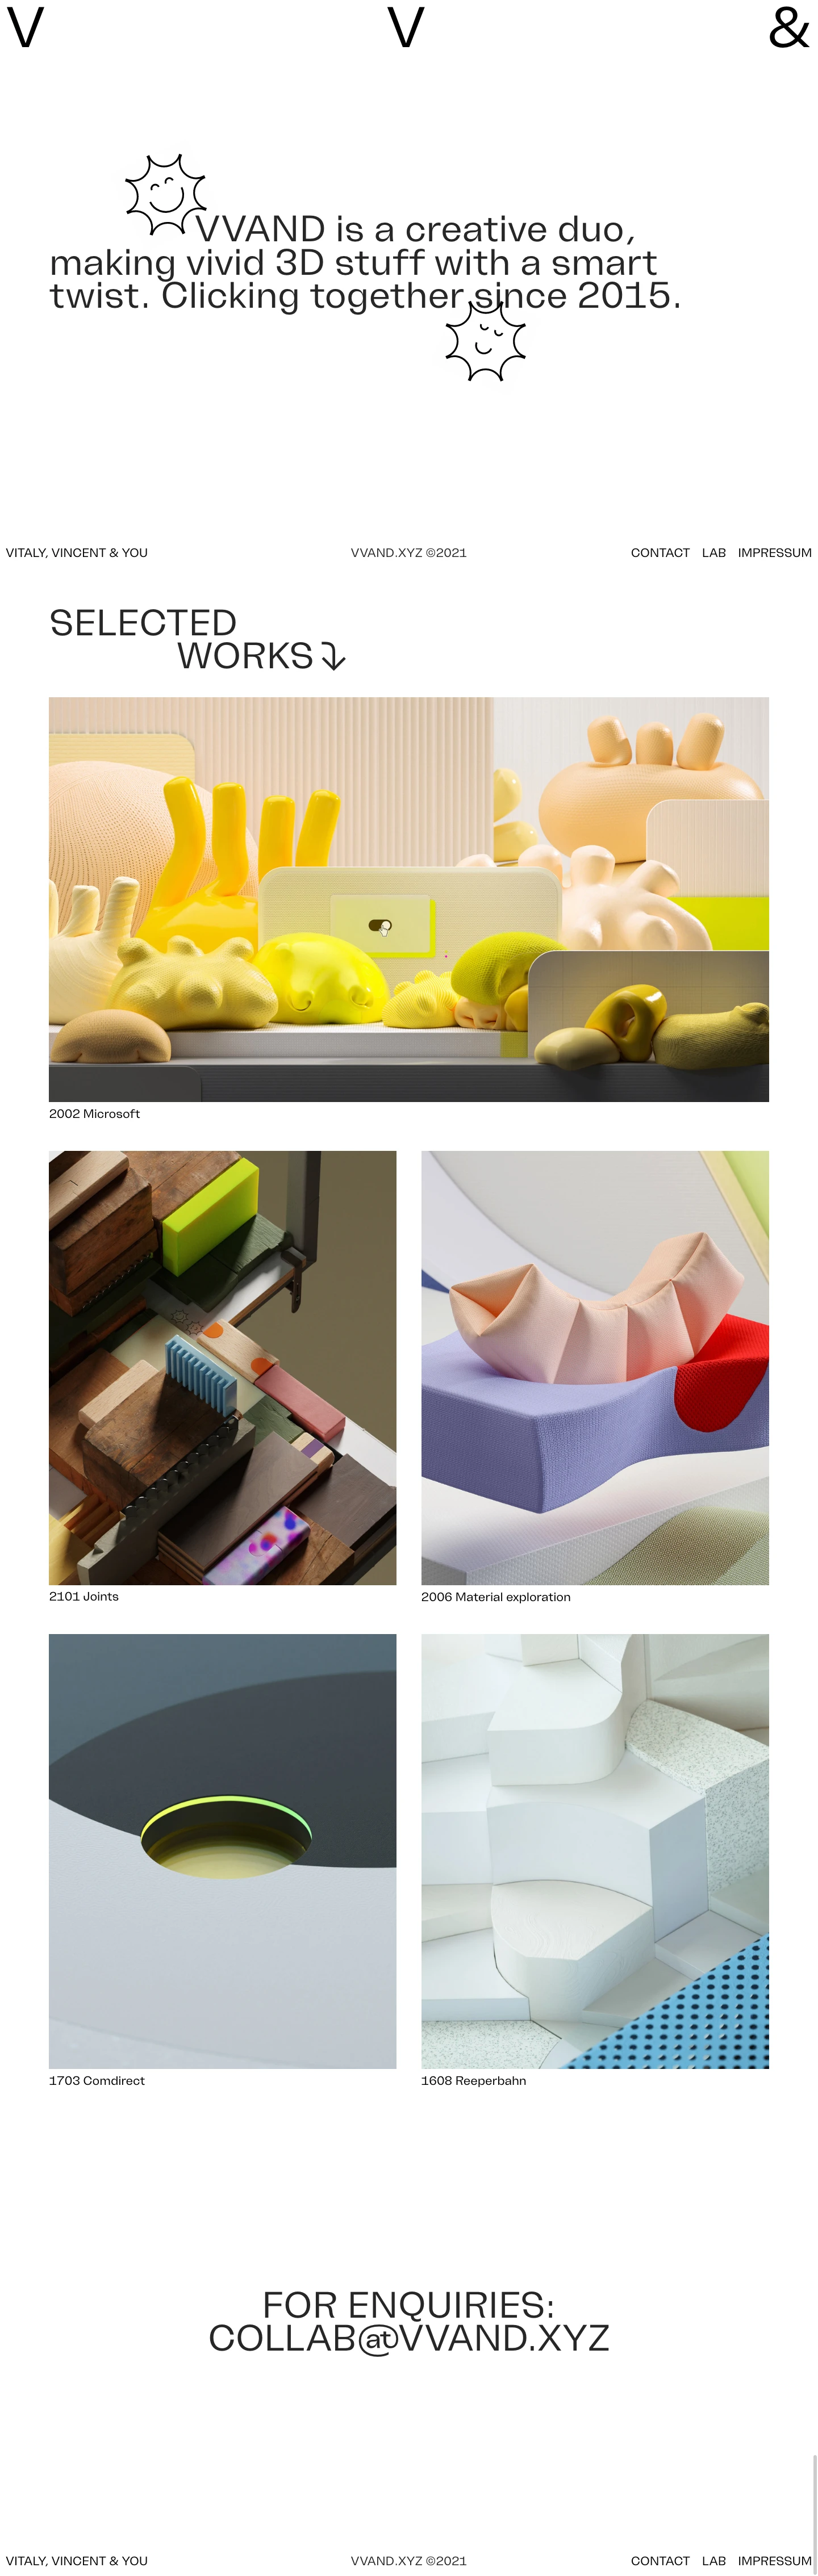 VVAND Landing Page Example: VVAND is a creative duo, making vivid 3D stuff with a fun-damental twist. Clicking together since 2015.